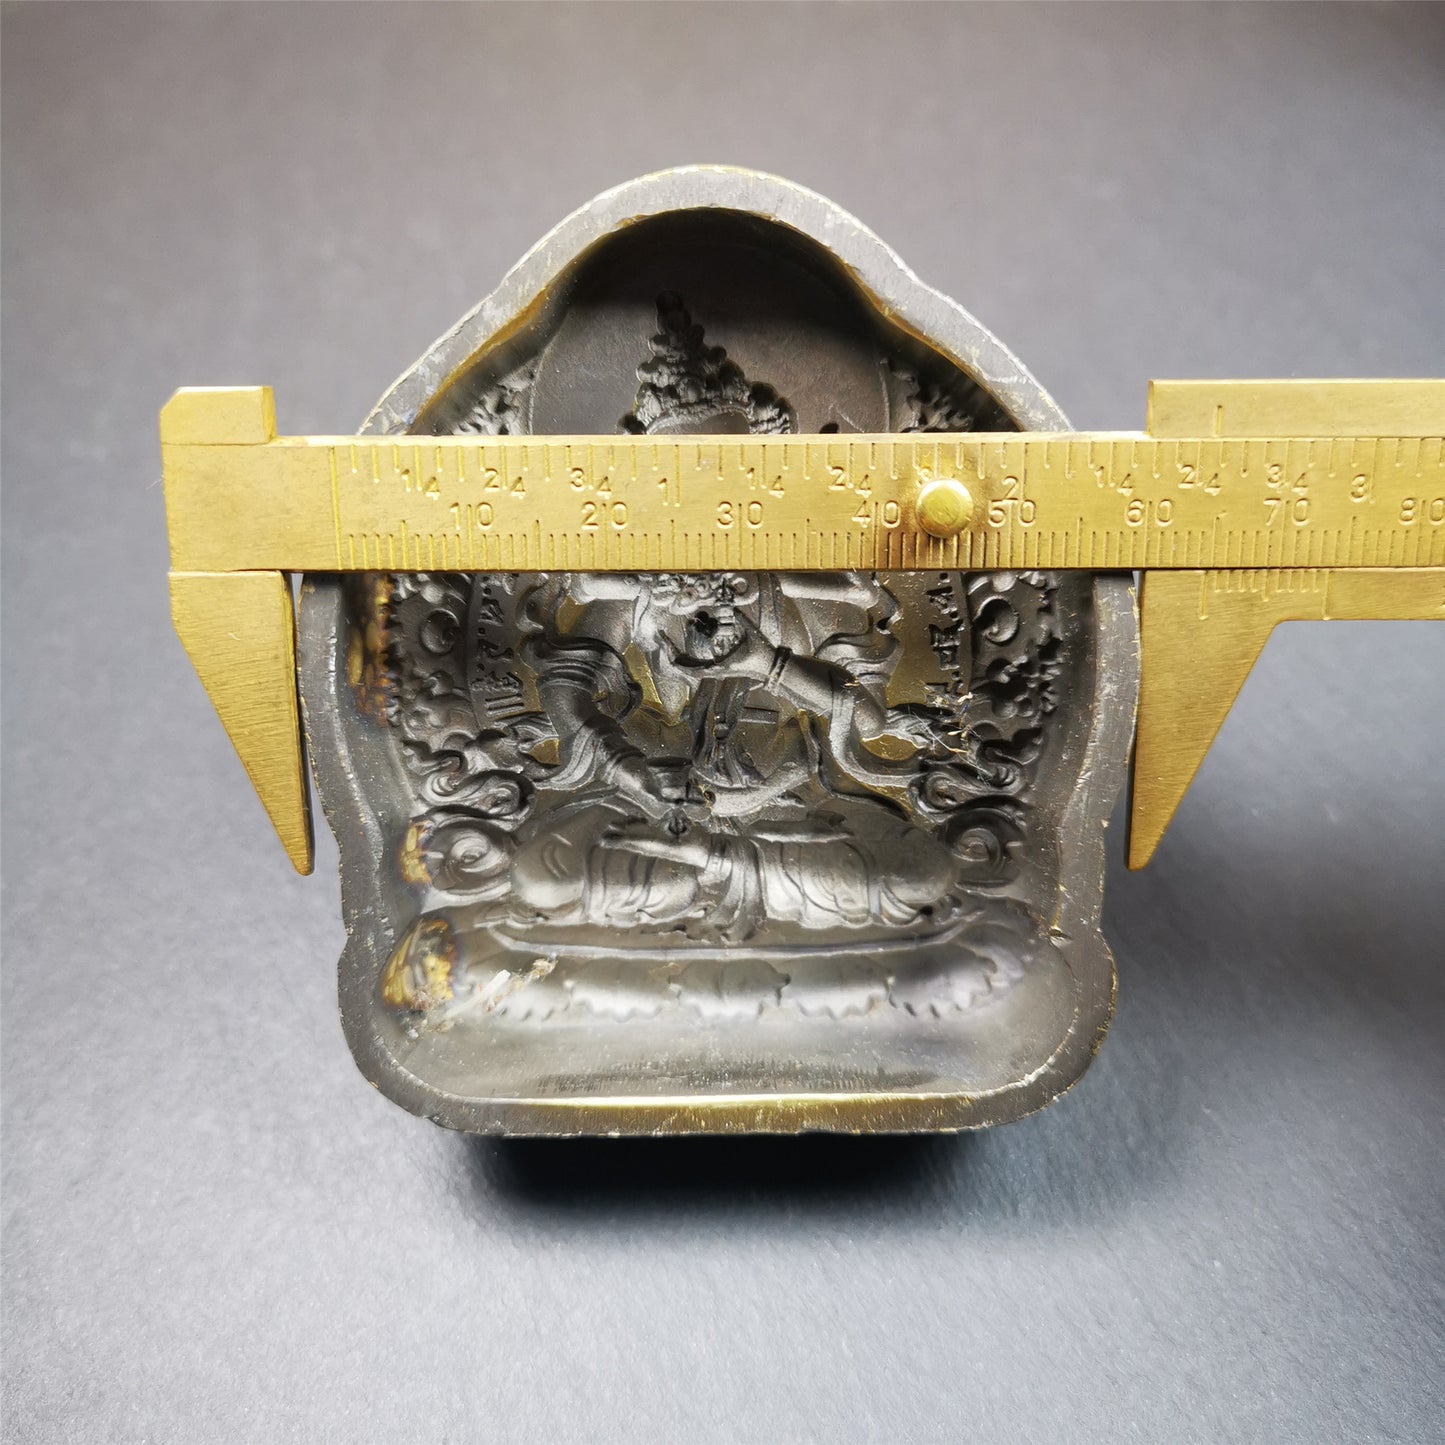 This Vajrapani Tsa-Tsa is made by Tibetan craftsmen in Hepo Town, Baiyu County. It is made of brass,yellow color,the shaple is Vajrapani,about 2.8inches height. With this mold, you can use clay to make your own Buddha statue.